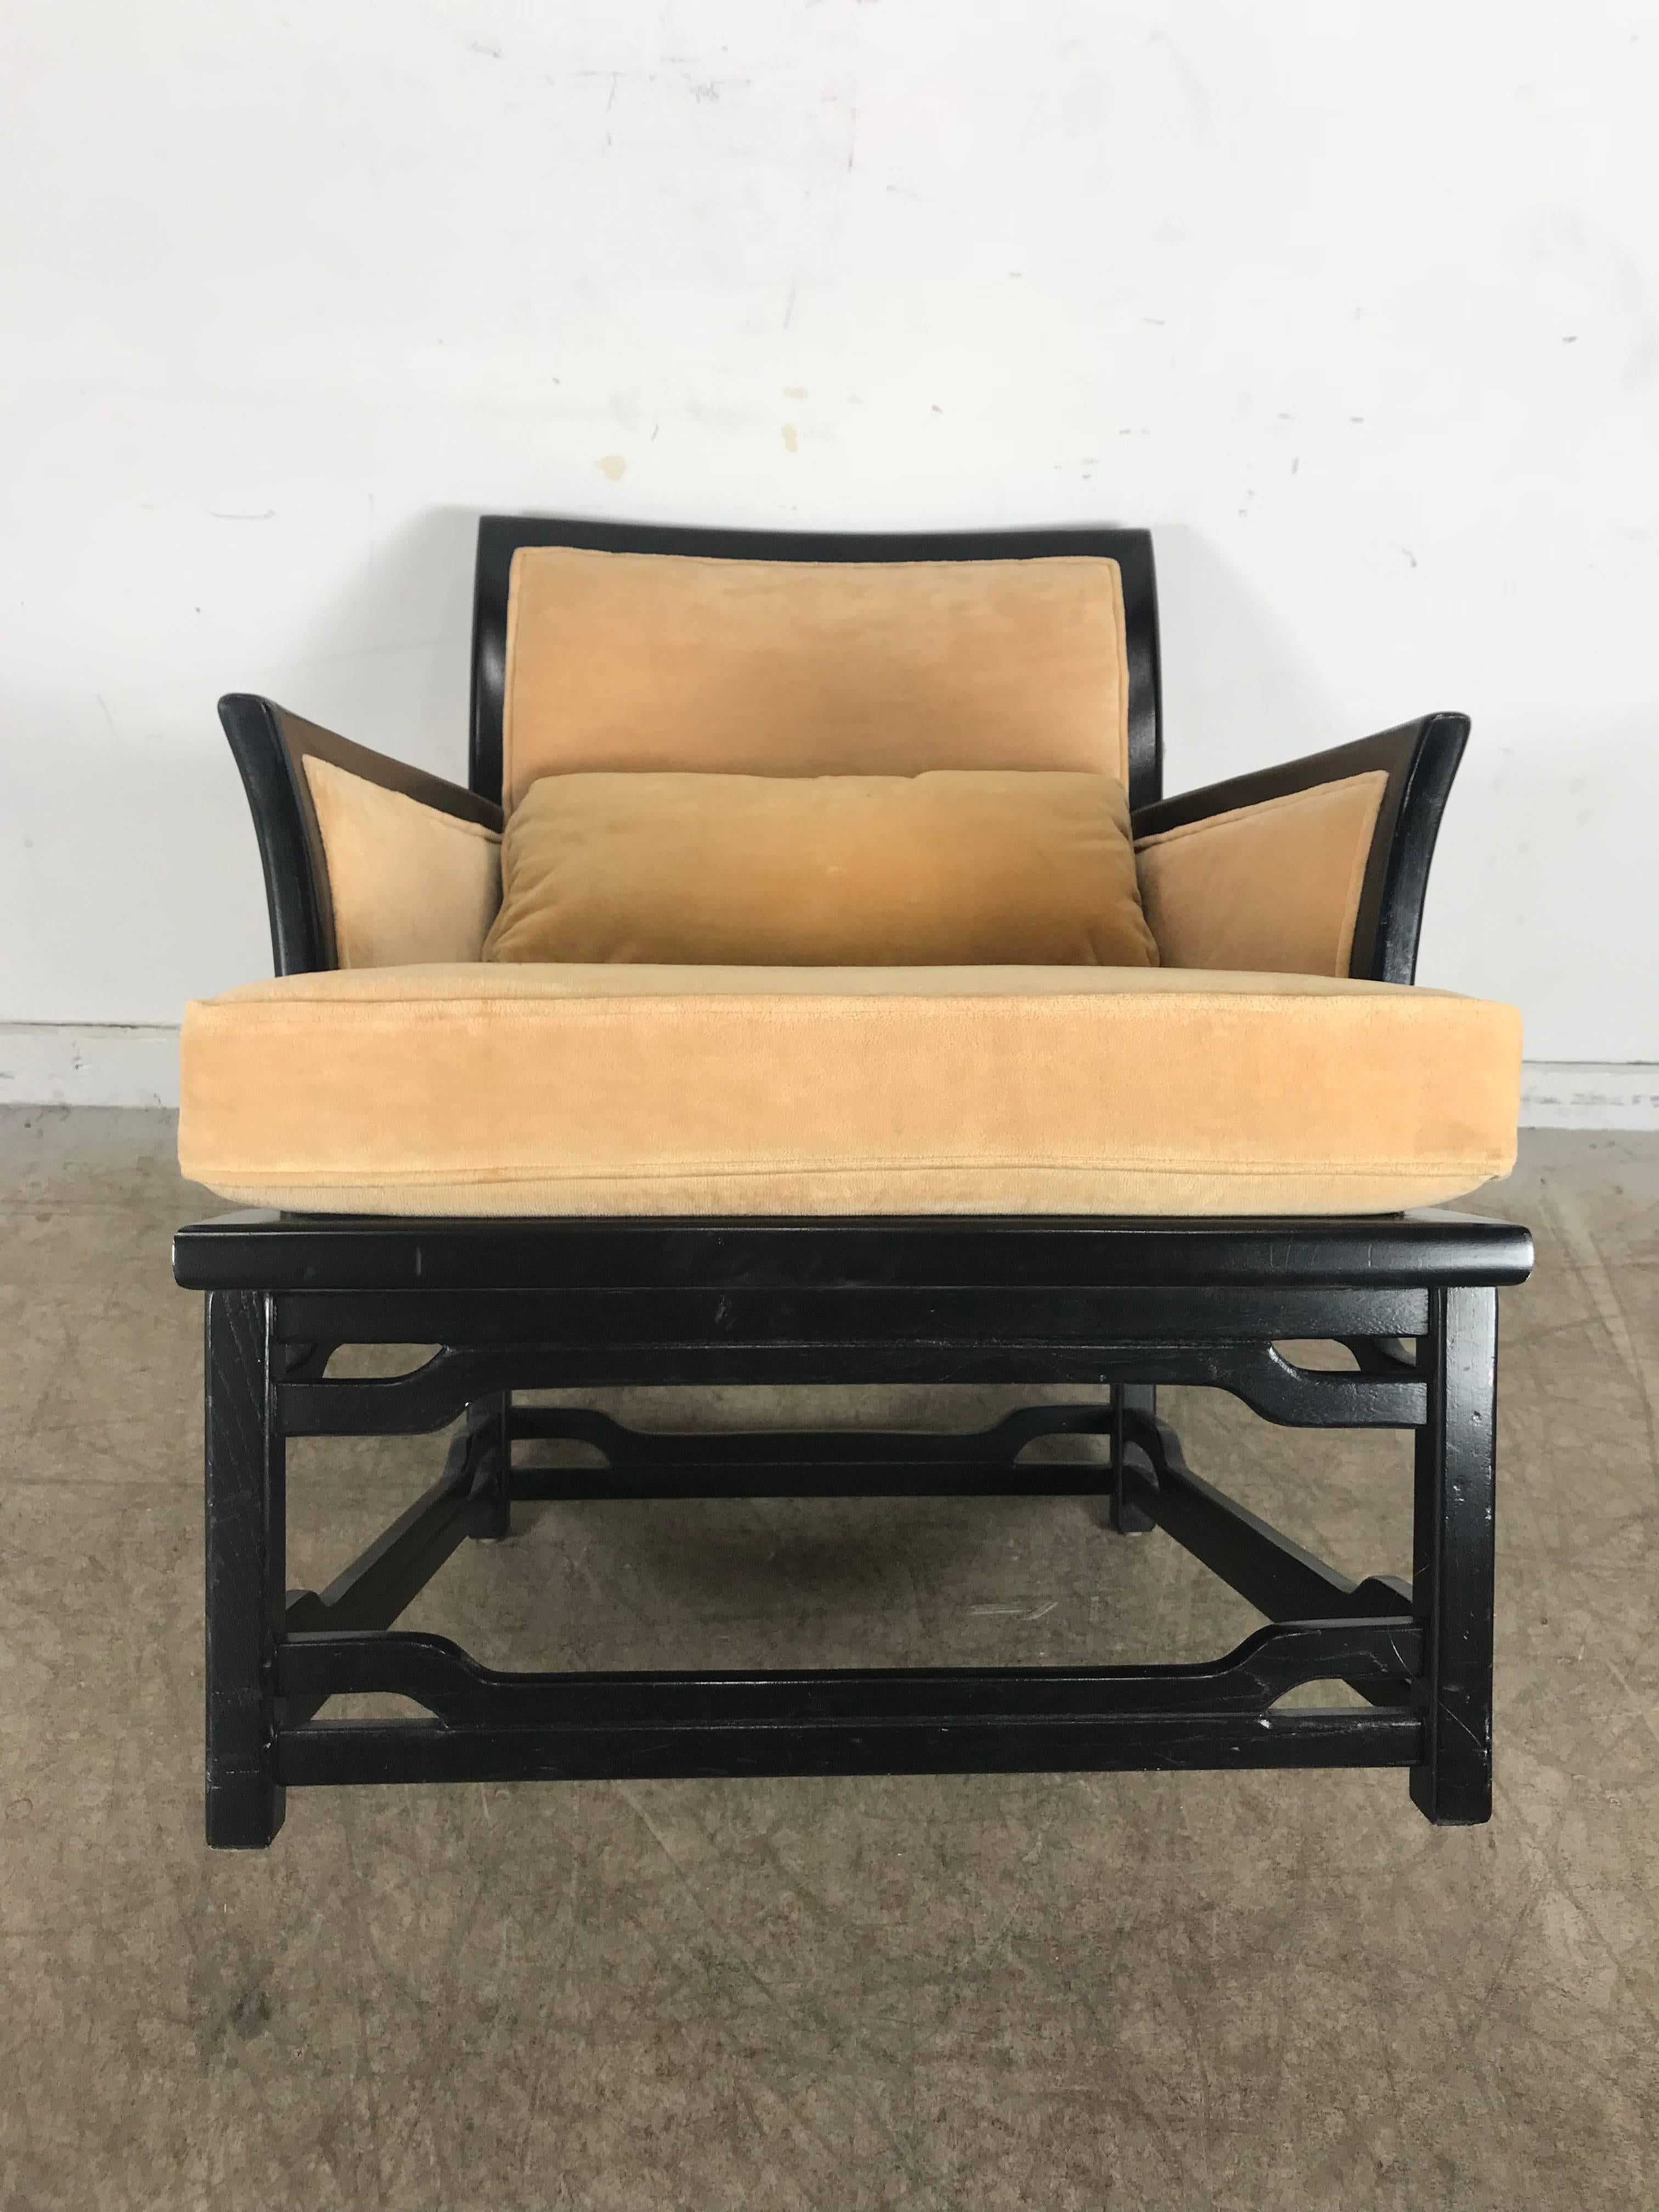 American Black Lacquer and Velvet Asian Modern Armchair by Hibriten after James Mont For Sale